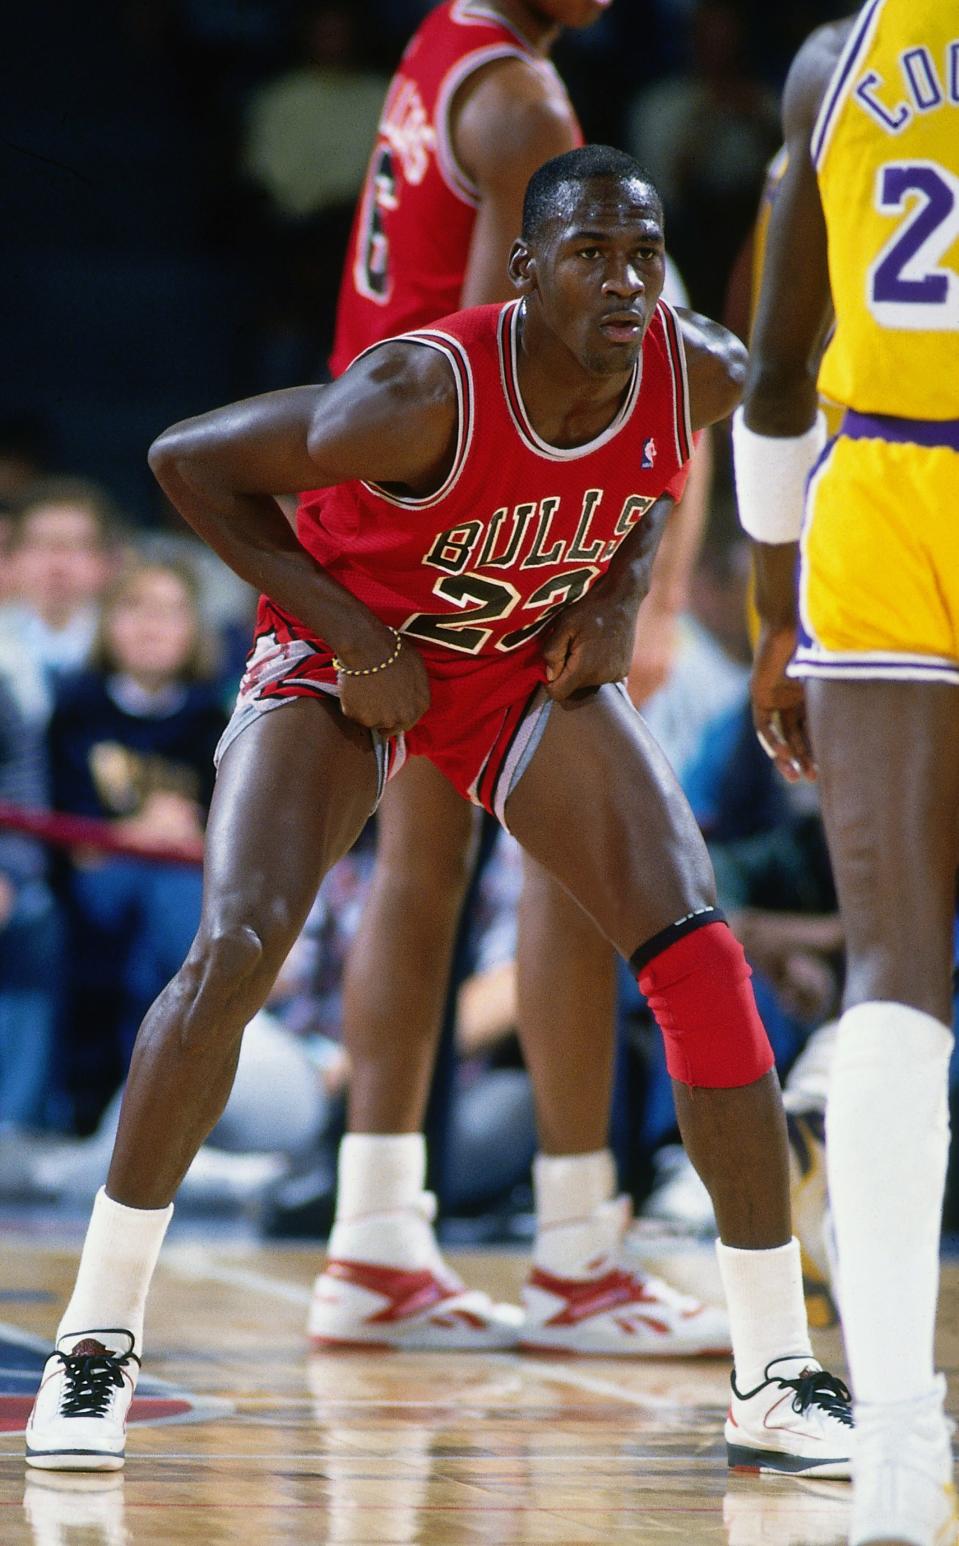 Michael Jordan defends against Michael Cooper in 1987 at the Great Western Forum in Inglewood, California. (Photo by Andrew D. Bernstein/NBAE via Getty Images)